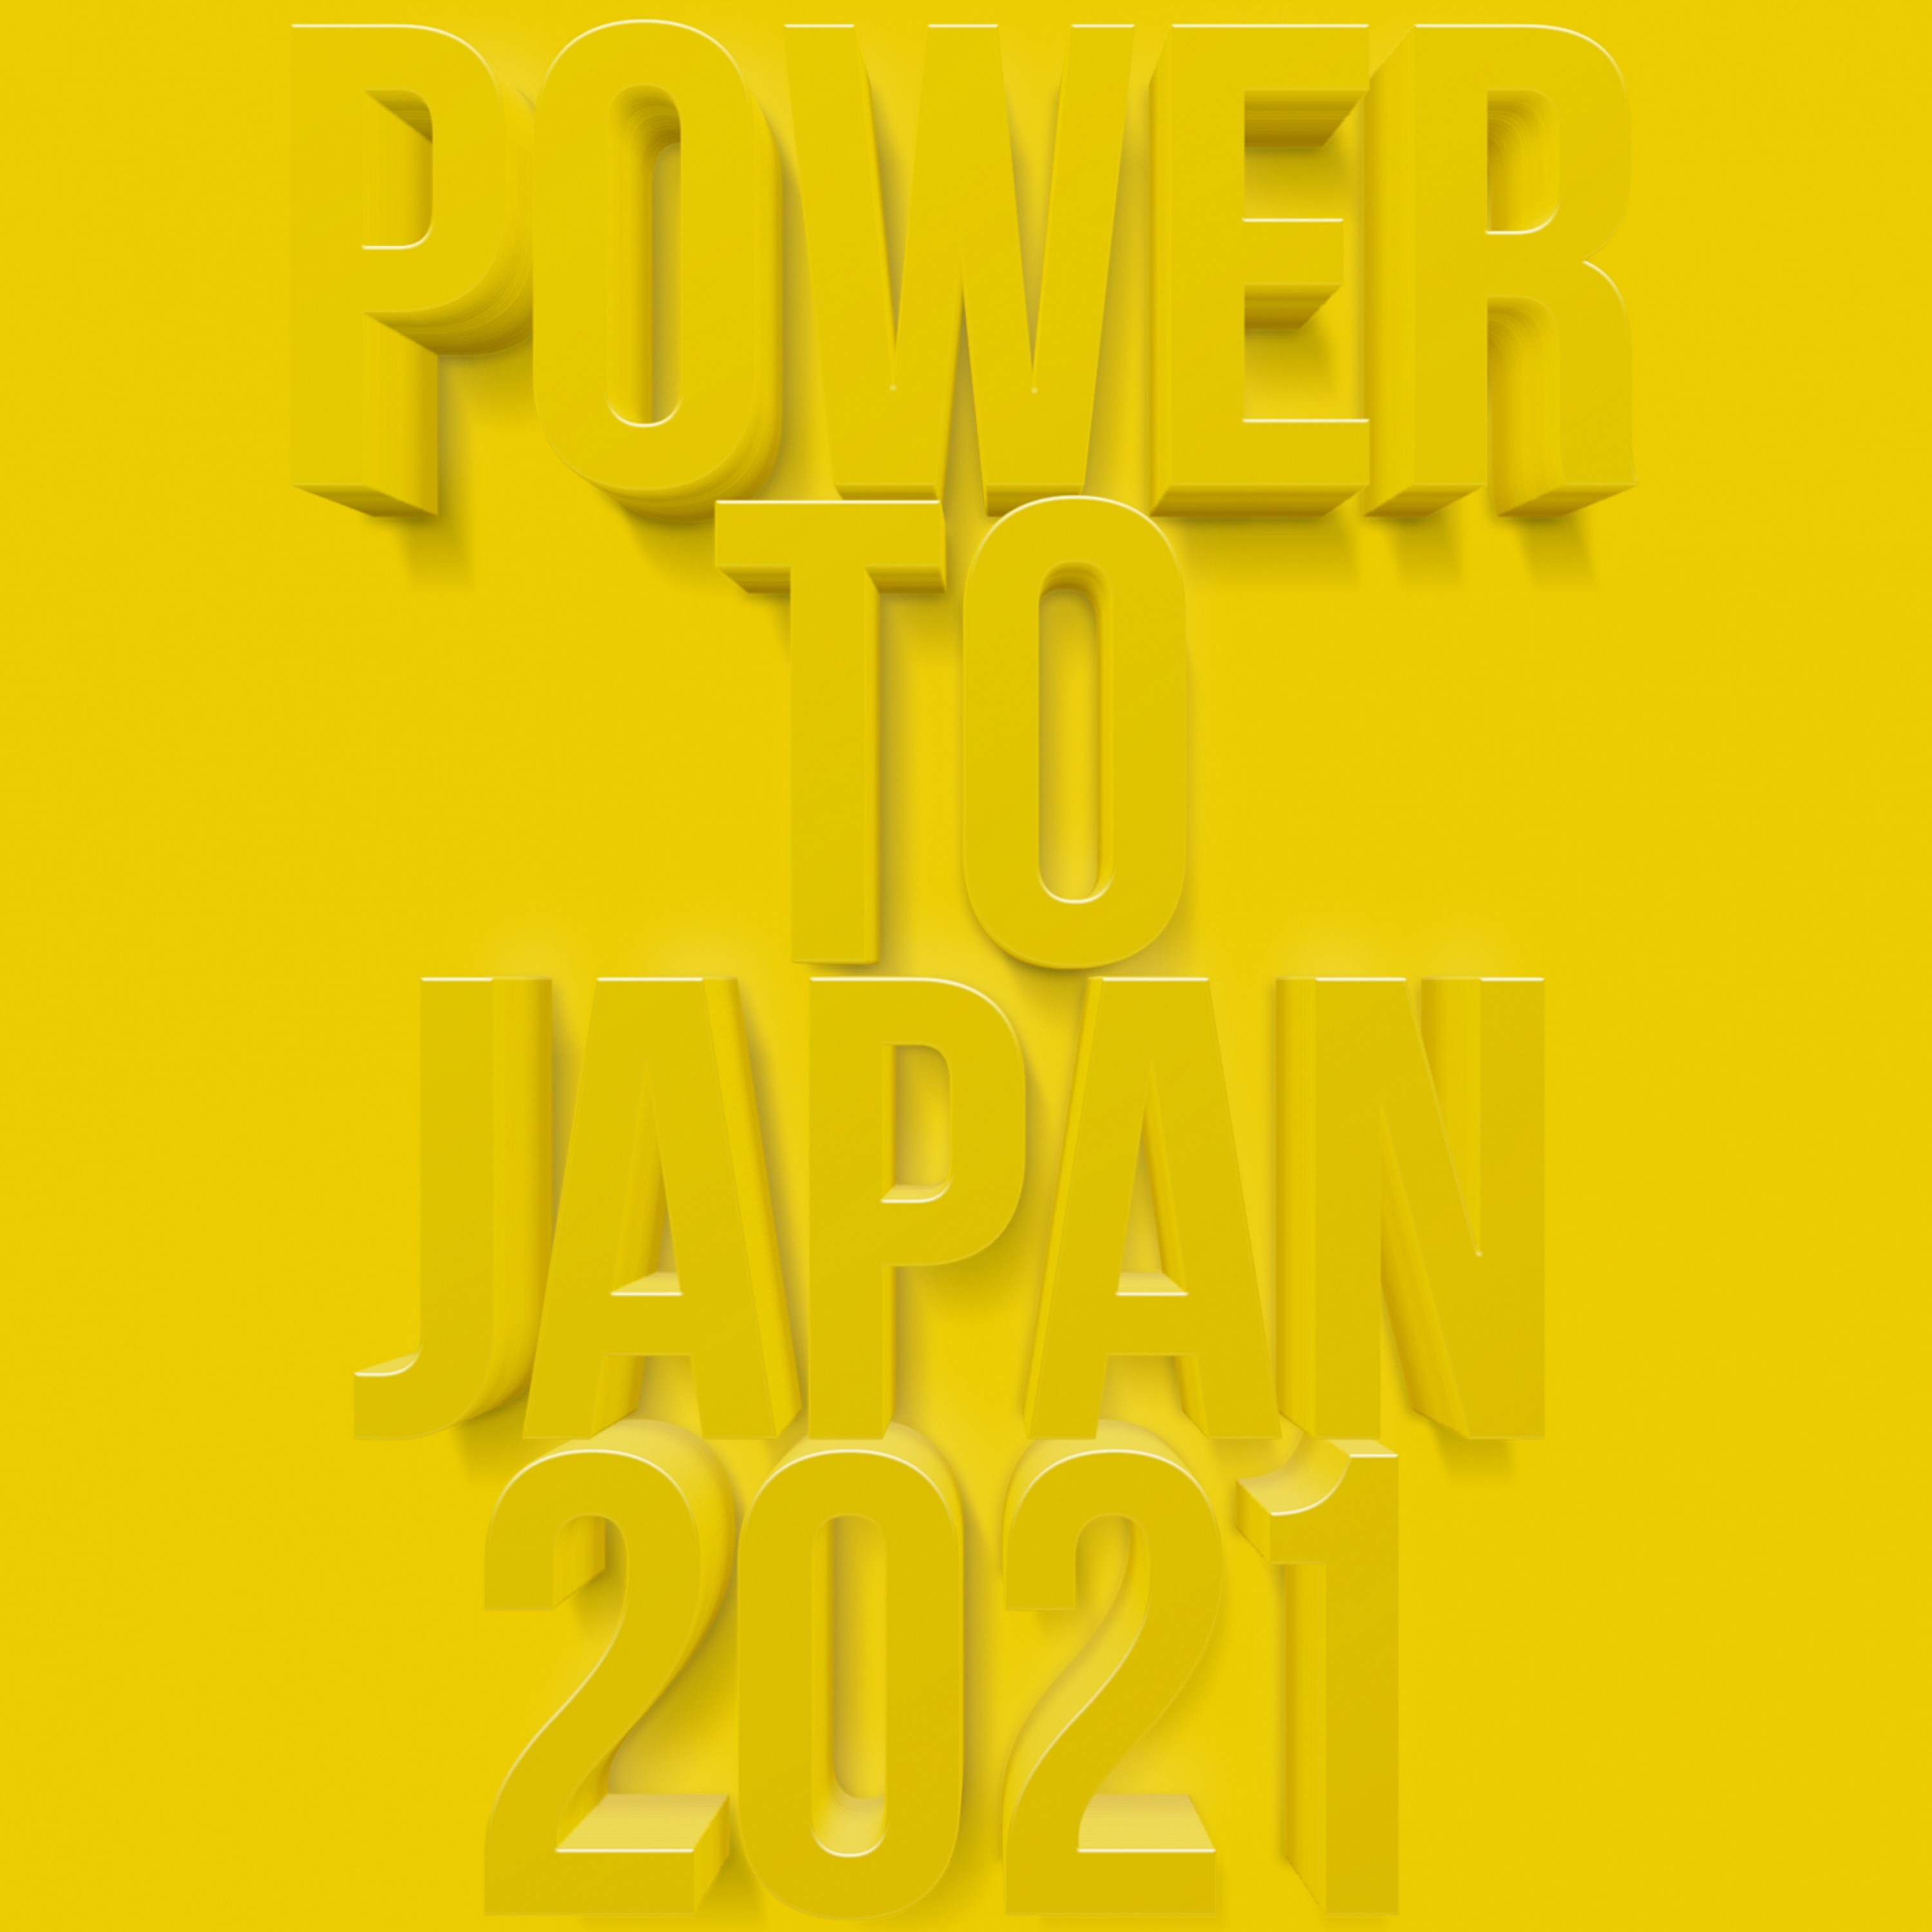 POWER TO JAPAN 2021